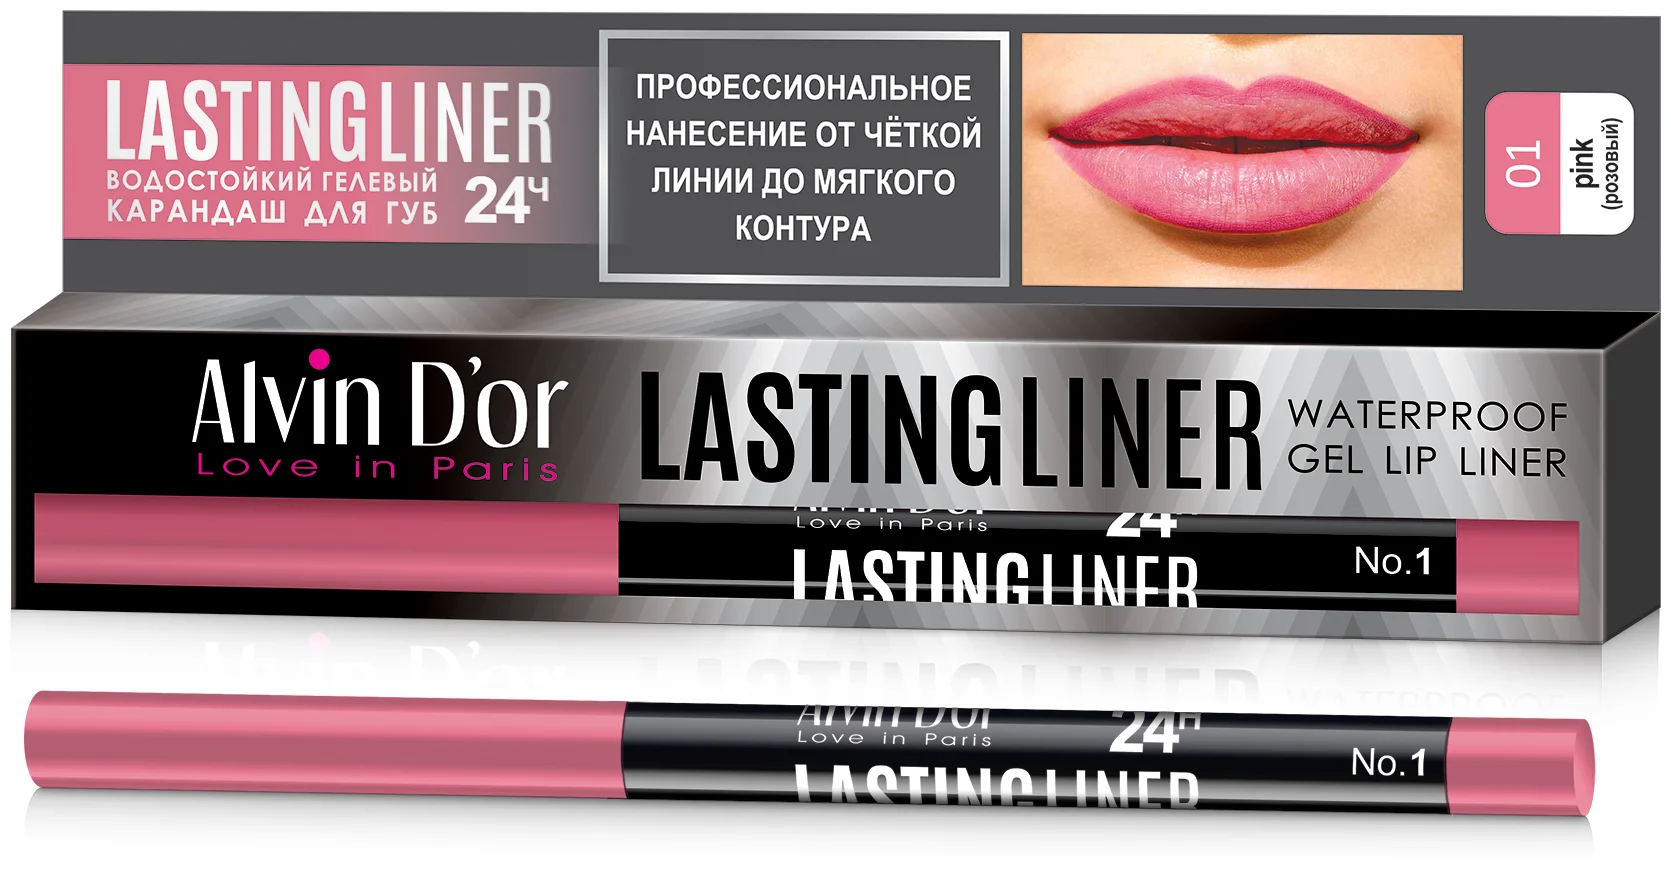 Alvin D'or Lasting Liner - текстура: гелевая